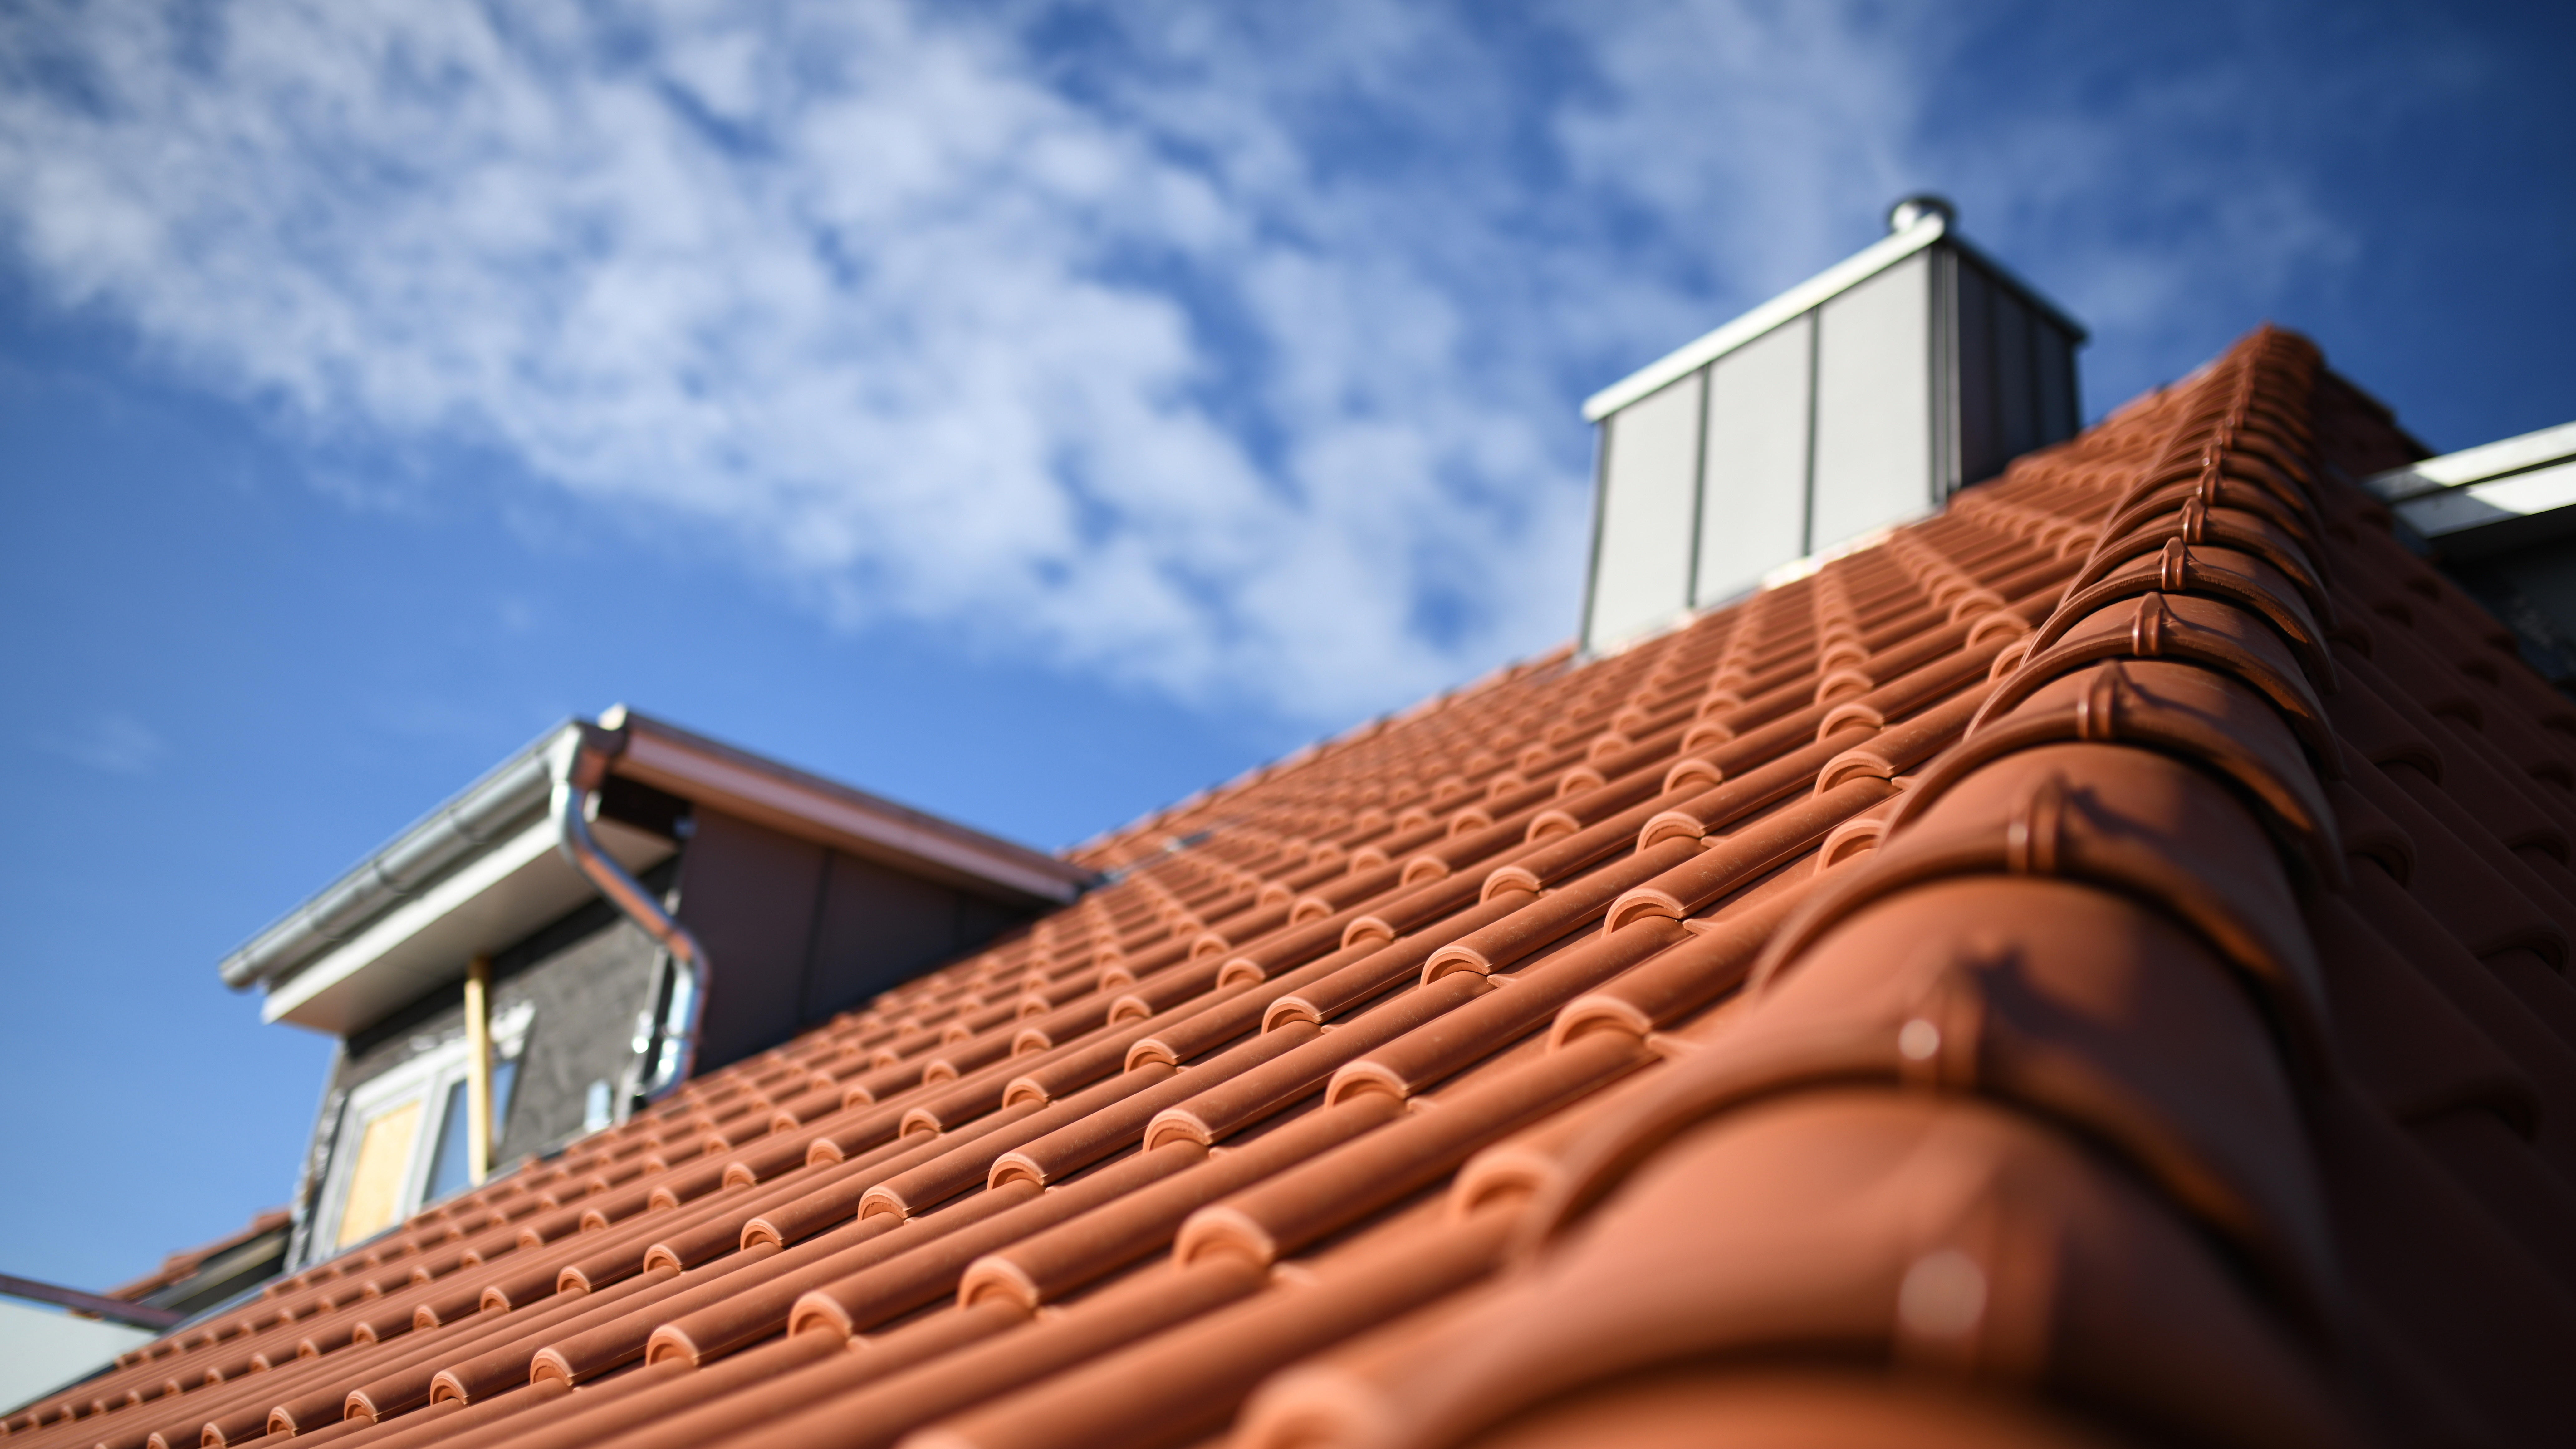 A residential roof with red clay tiles